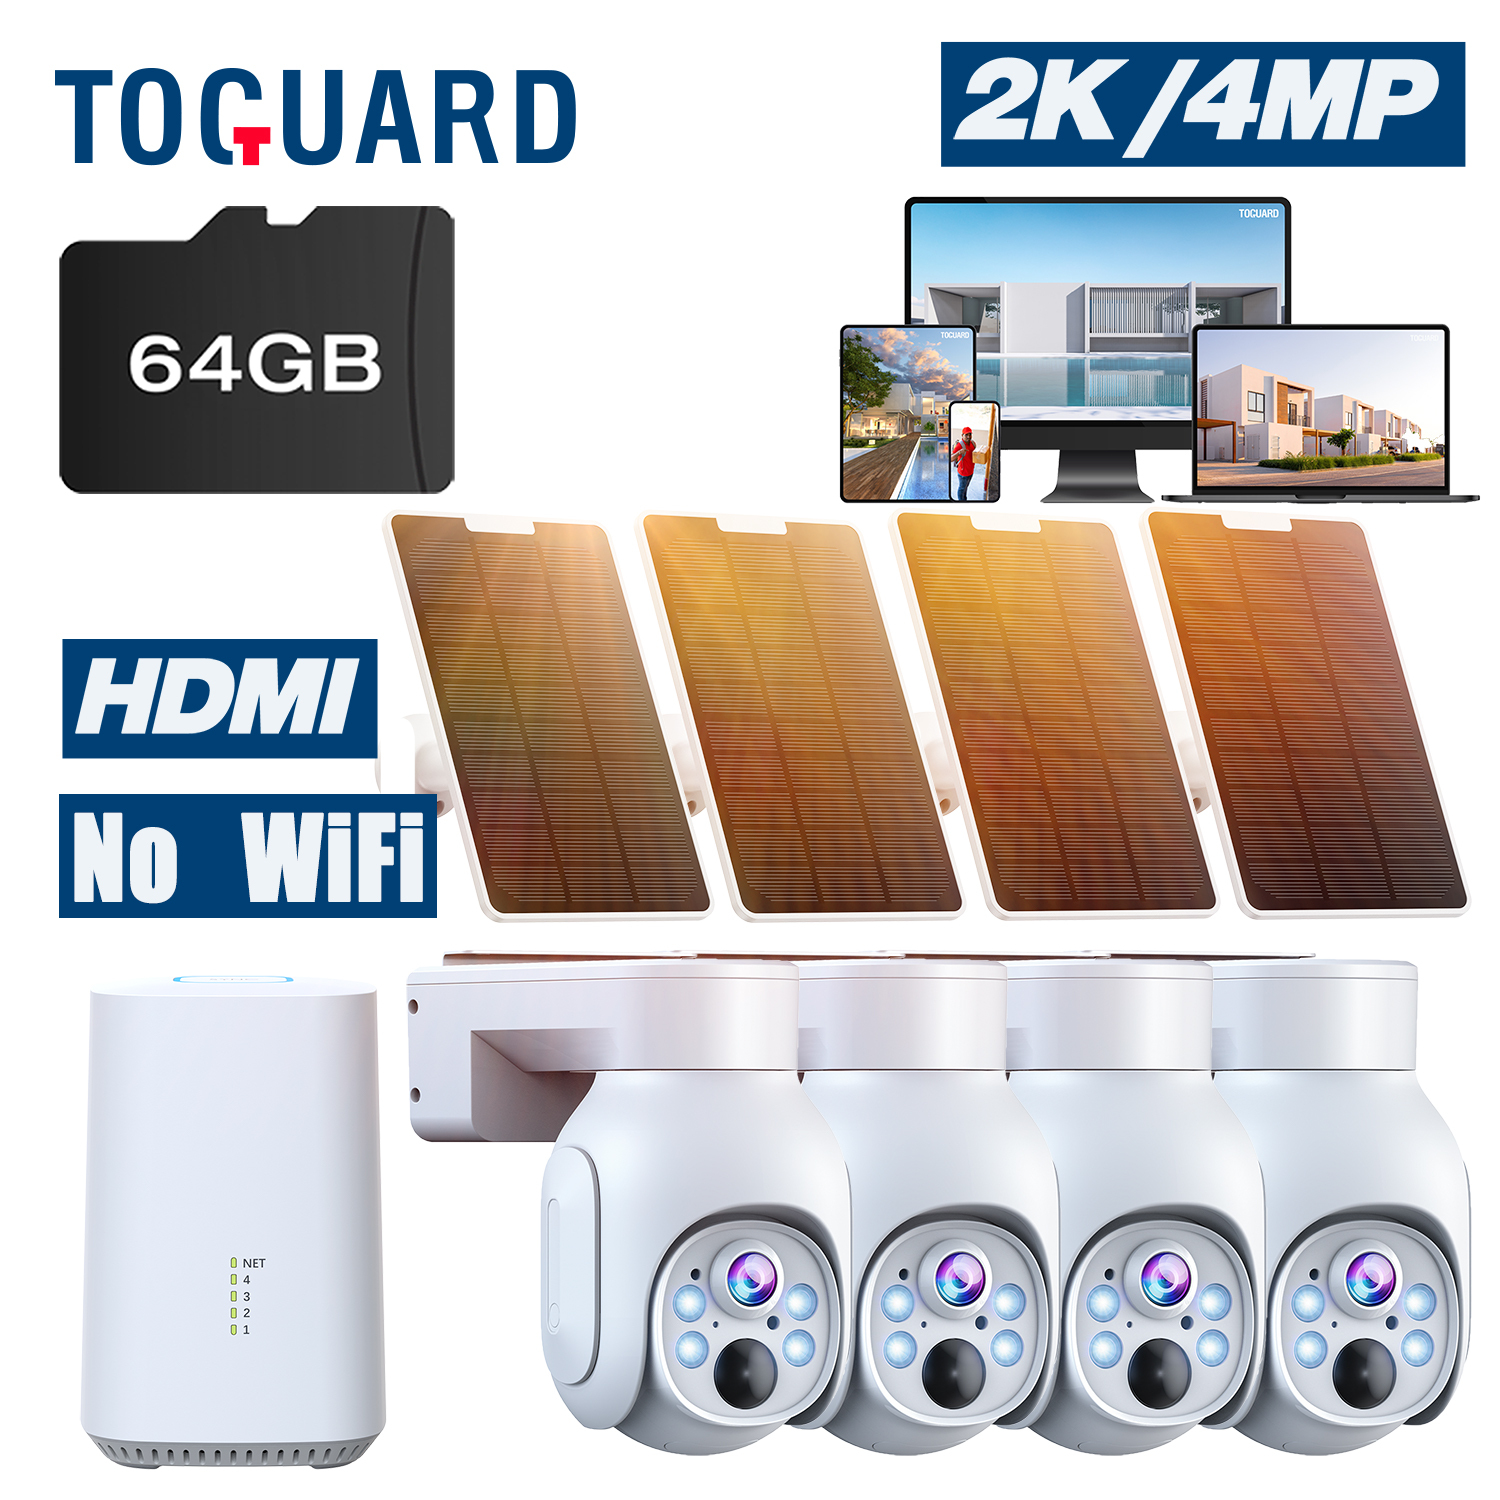 Toguard Solar Wireless Security Camera System Outdoor Battery Bullet Surveillance Camera Wireless Connector (Only supports 2.4Ghz WiFi) - image 1 of 8